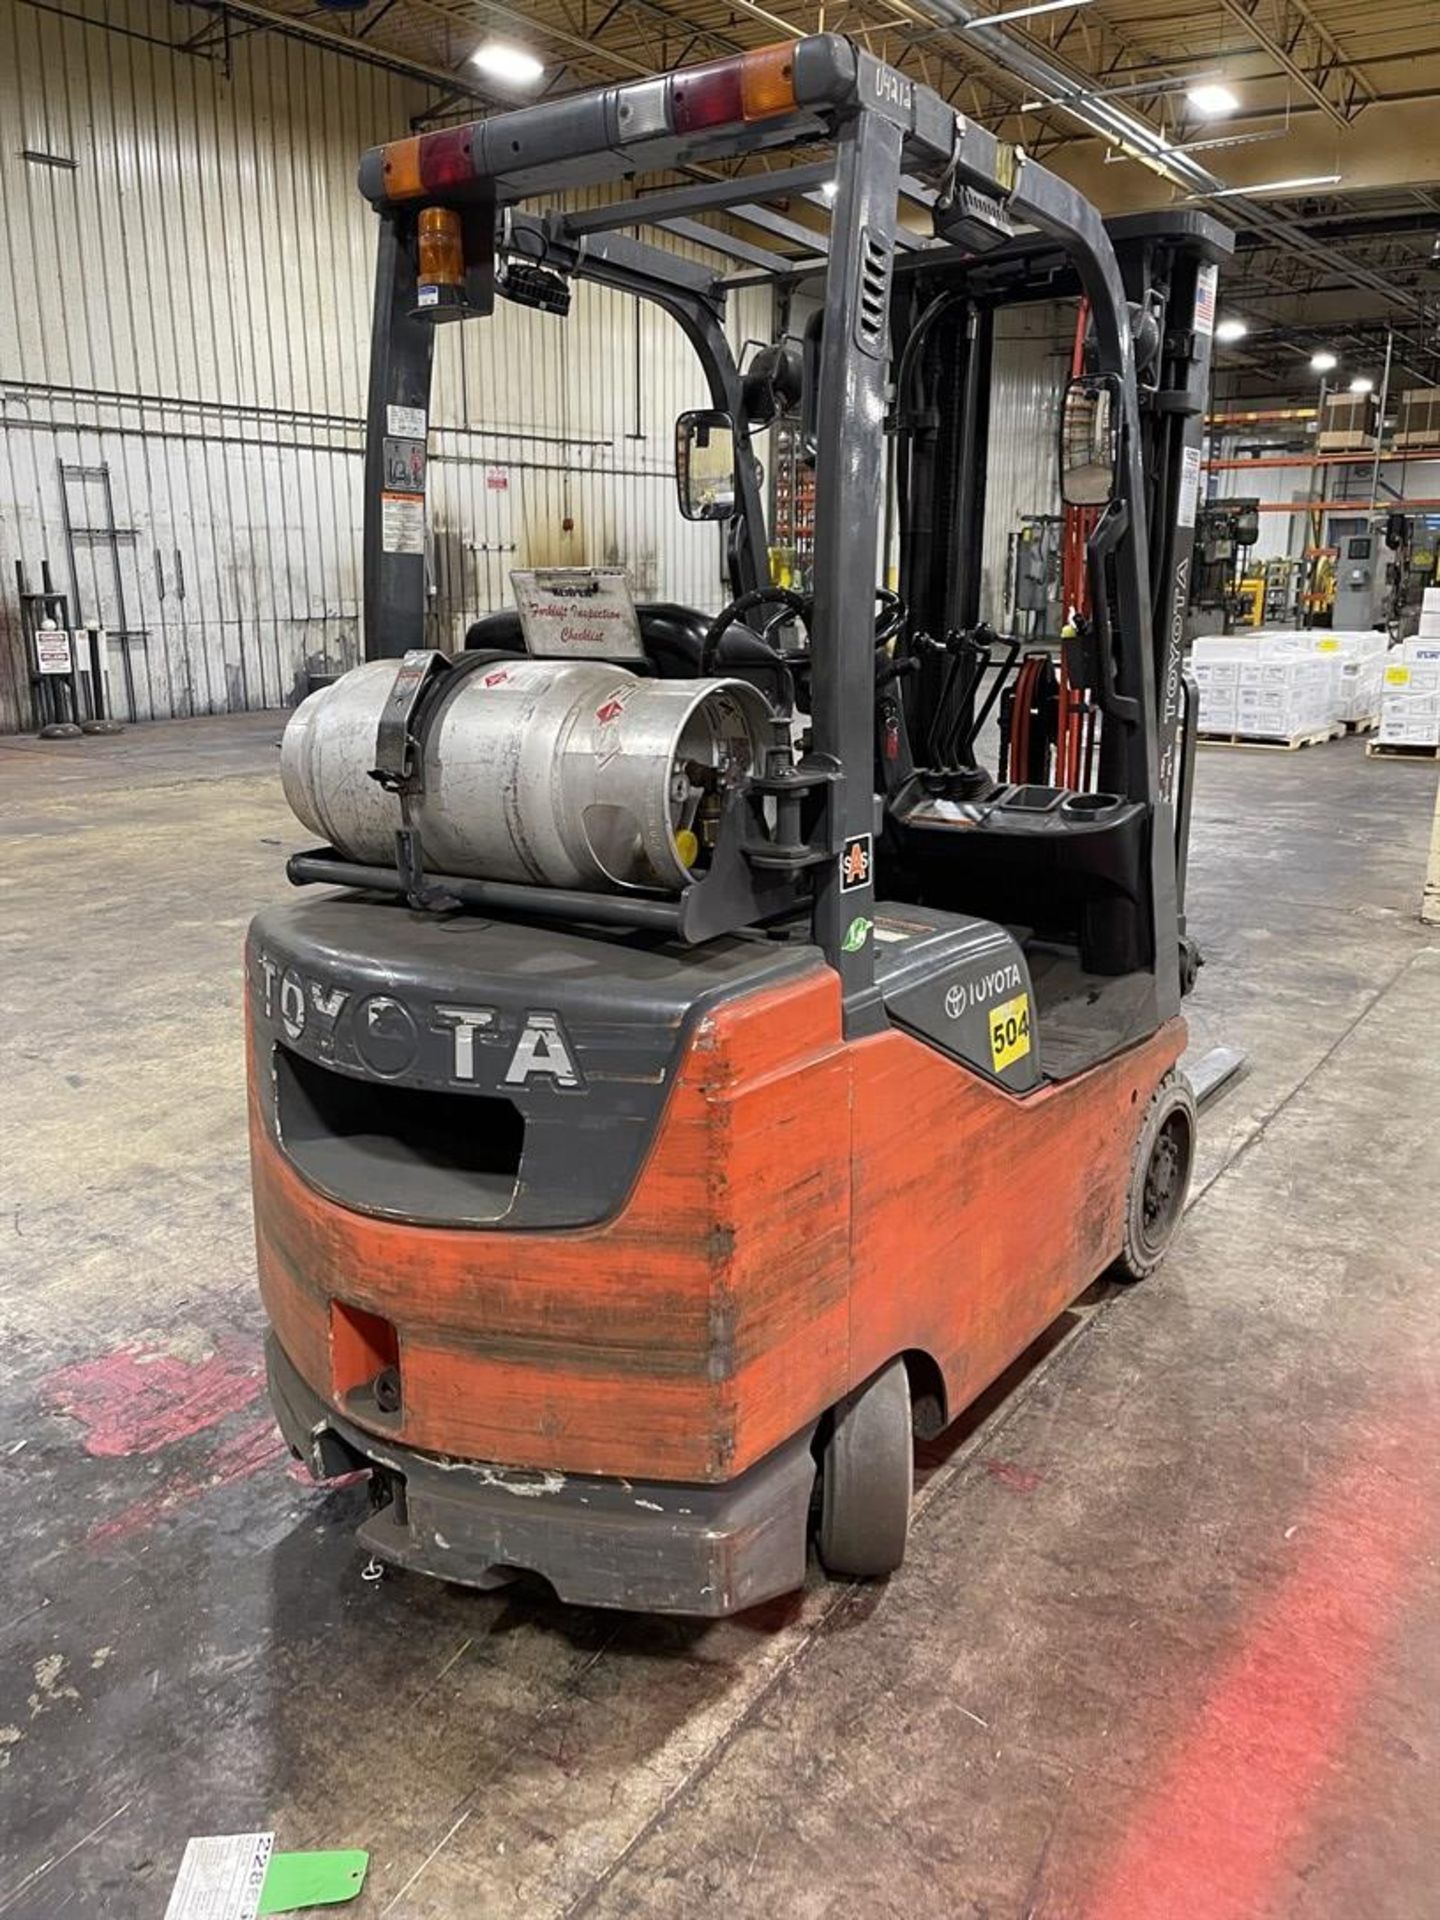 TOYOTA 8FGCSU20 LP Forklift, s/n 13417, 4,000 Lb. Capacity, Side Shift, 3-Stage Mast, Cushion Tire - Image 4 of 8